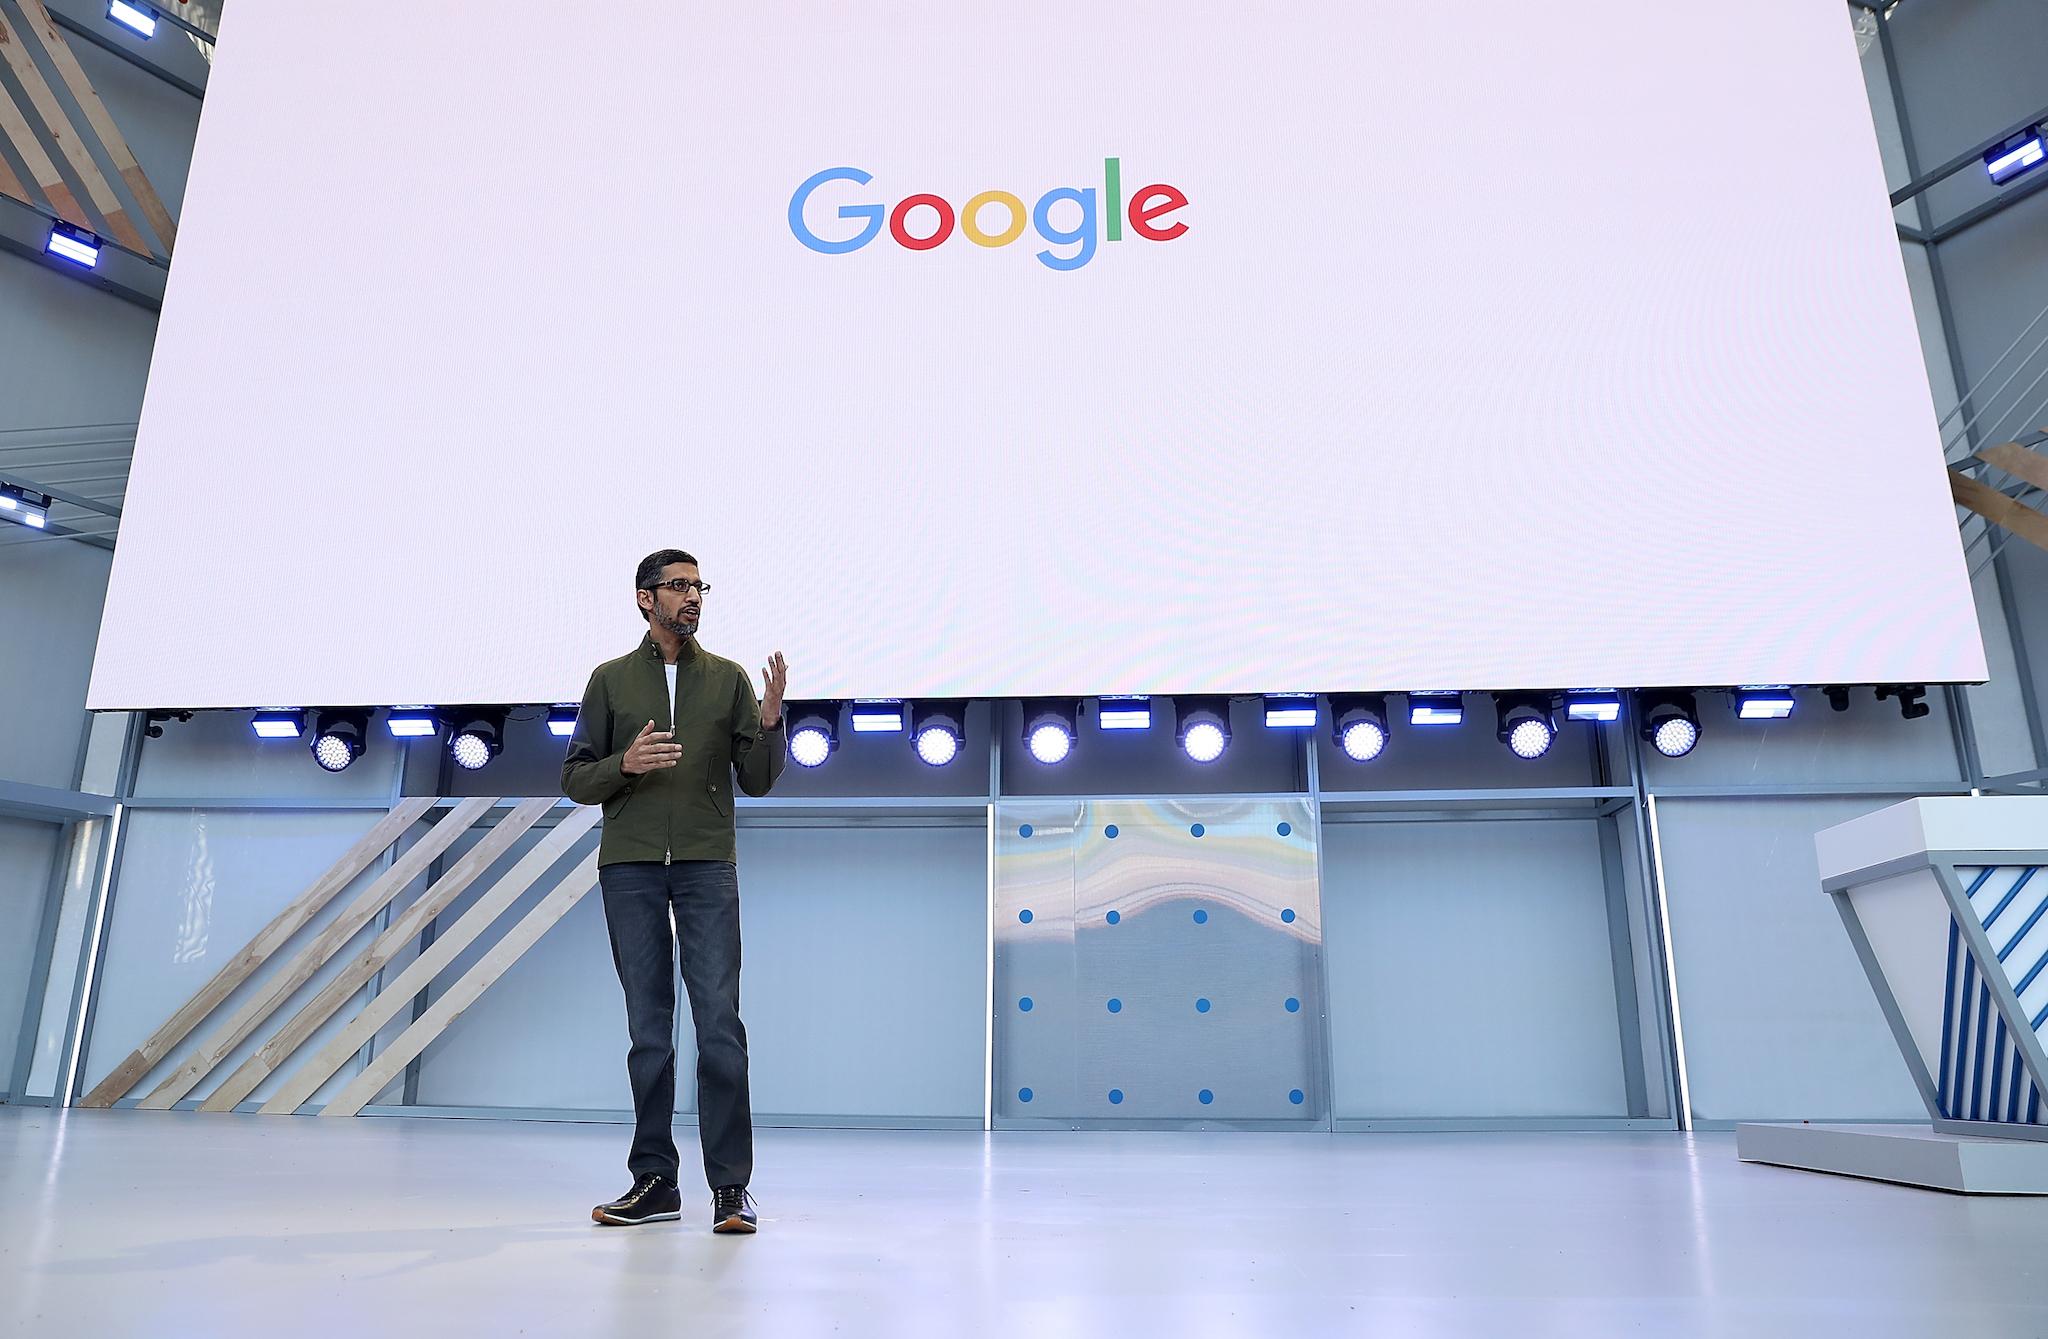 Google CEO Sundar Pichai delivers the keynote address at the Google I/O 2018 Conference at Shoreline Amphitheater on May 8, 2018 in Mountain View, California